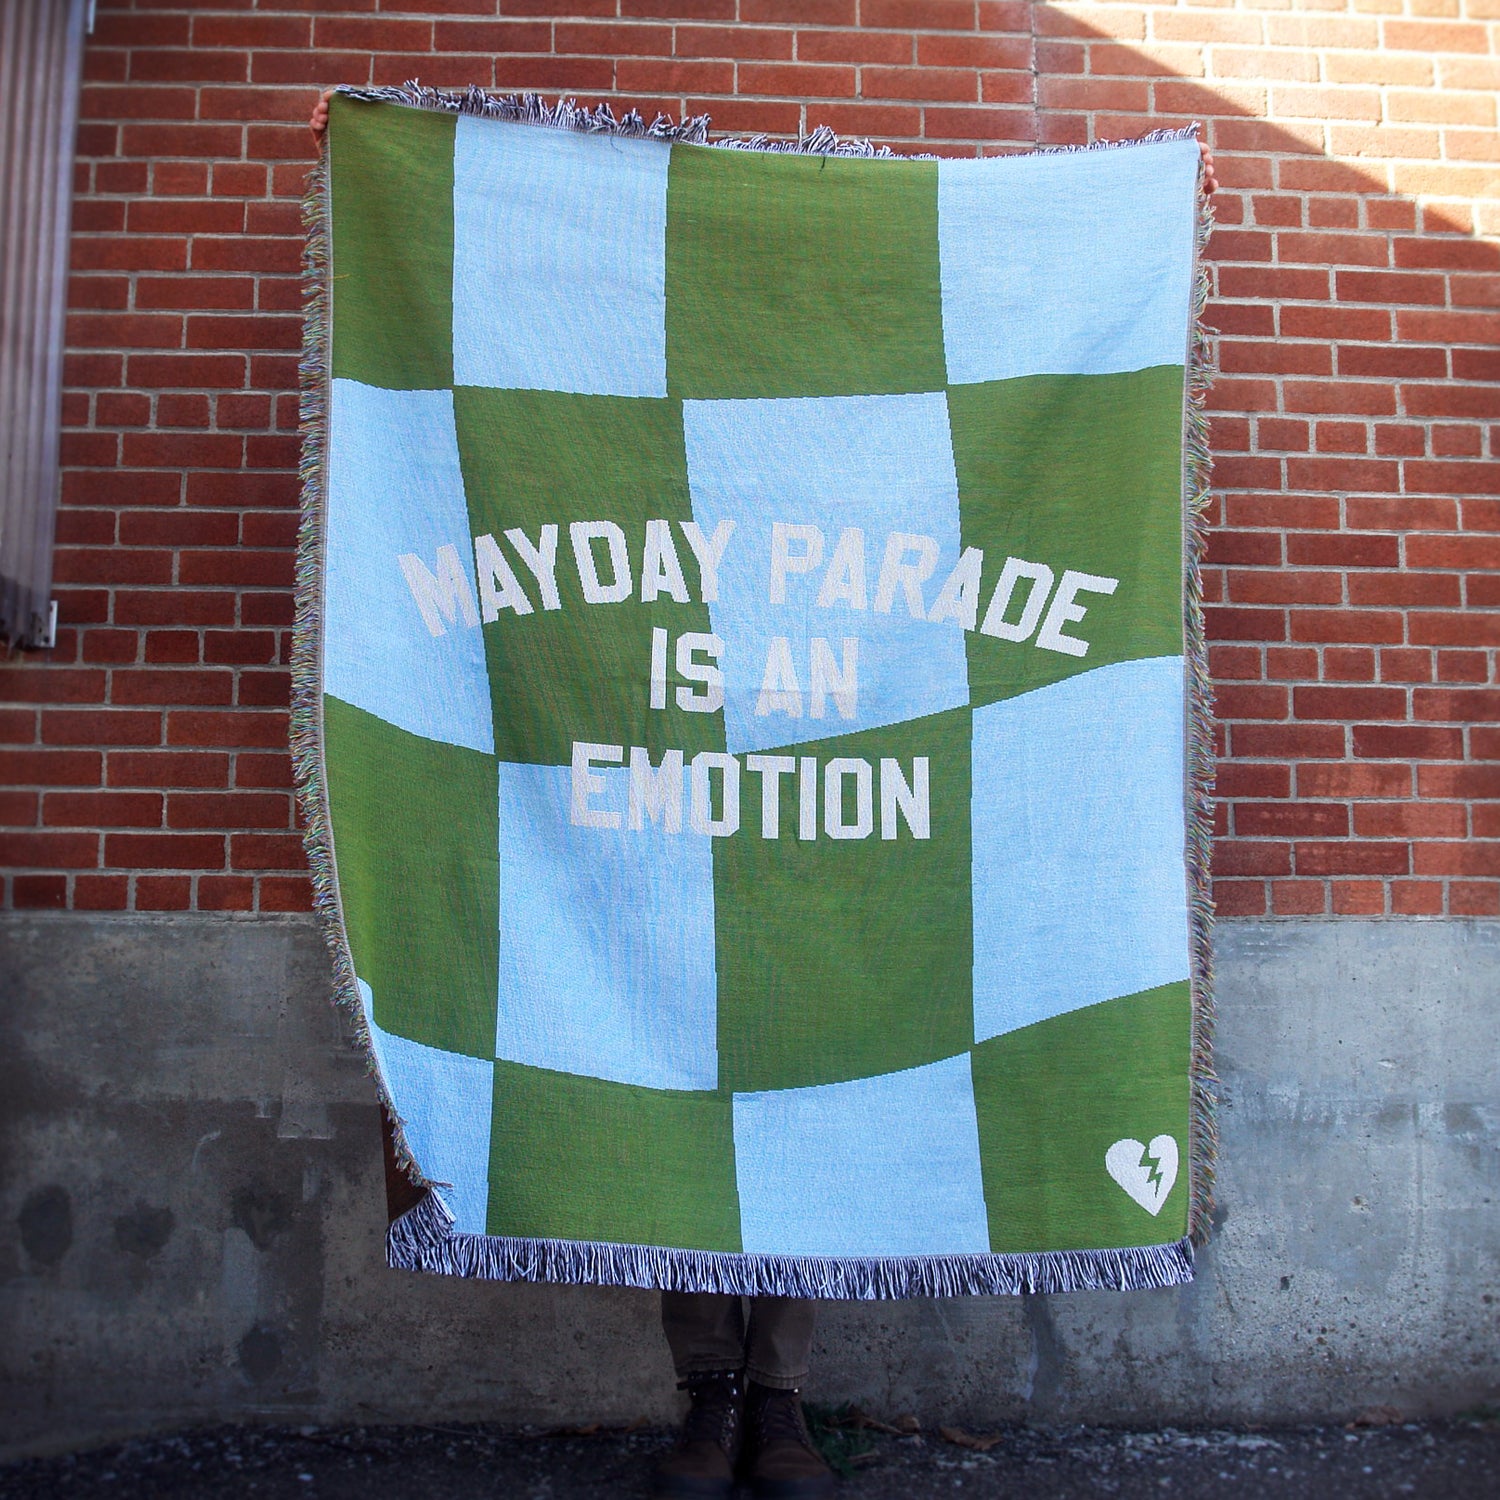 image of a custom woven blanket held up outside in front of a brick wall. blanket is green and blue checkerboard and says mayday parade is an emotion in the center.